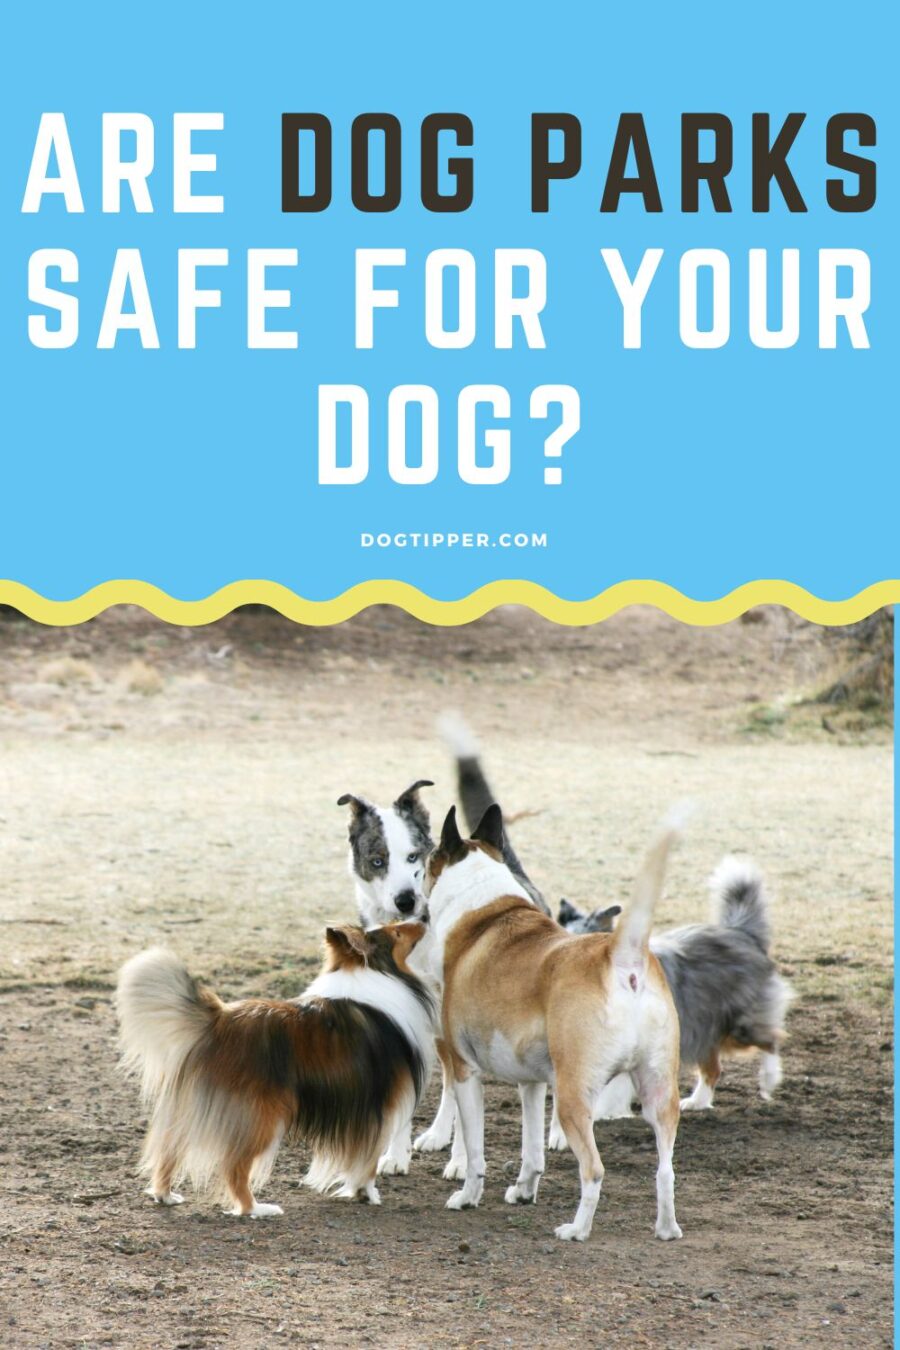 Dog Park Safety Tips: How to Keep Your Dog Safer at the Dog Park! 